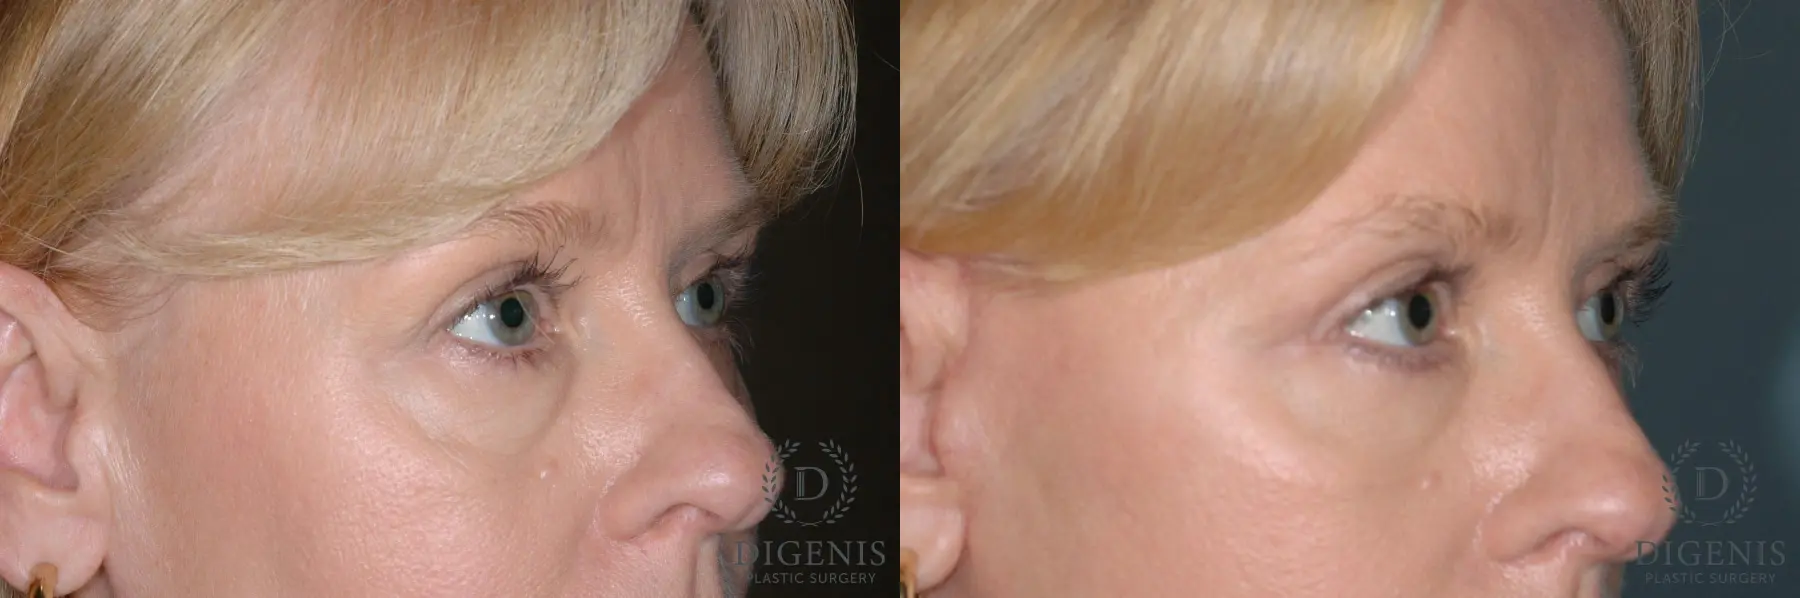 Eyelid Surgery: Patient 8 - Before and After 2